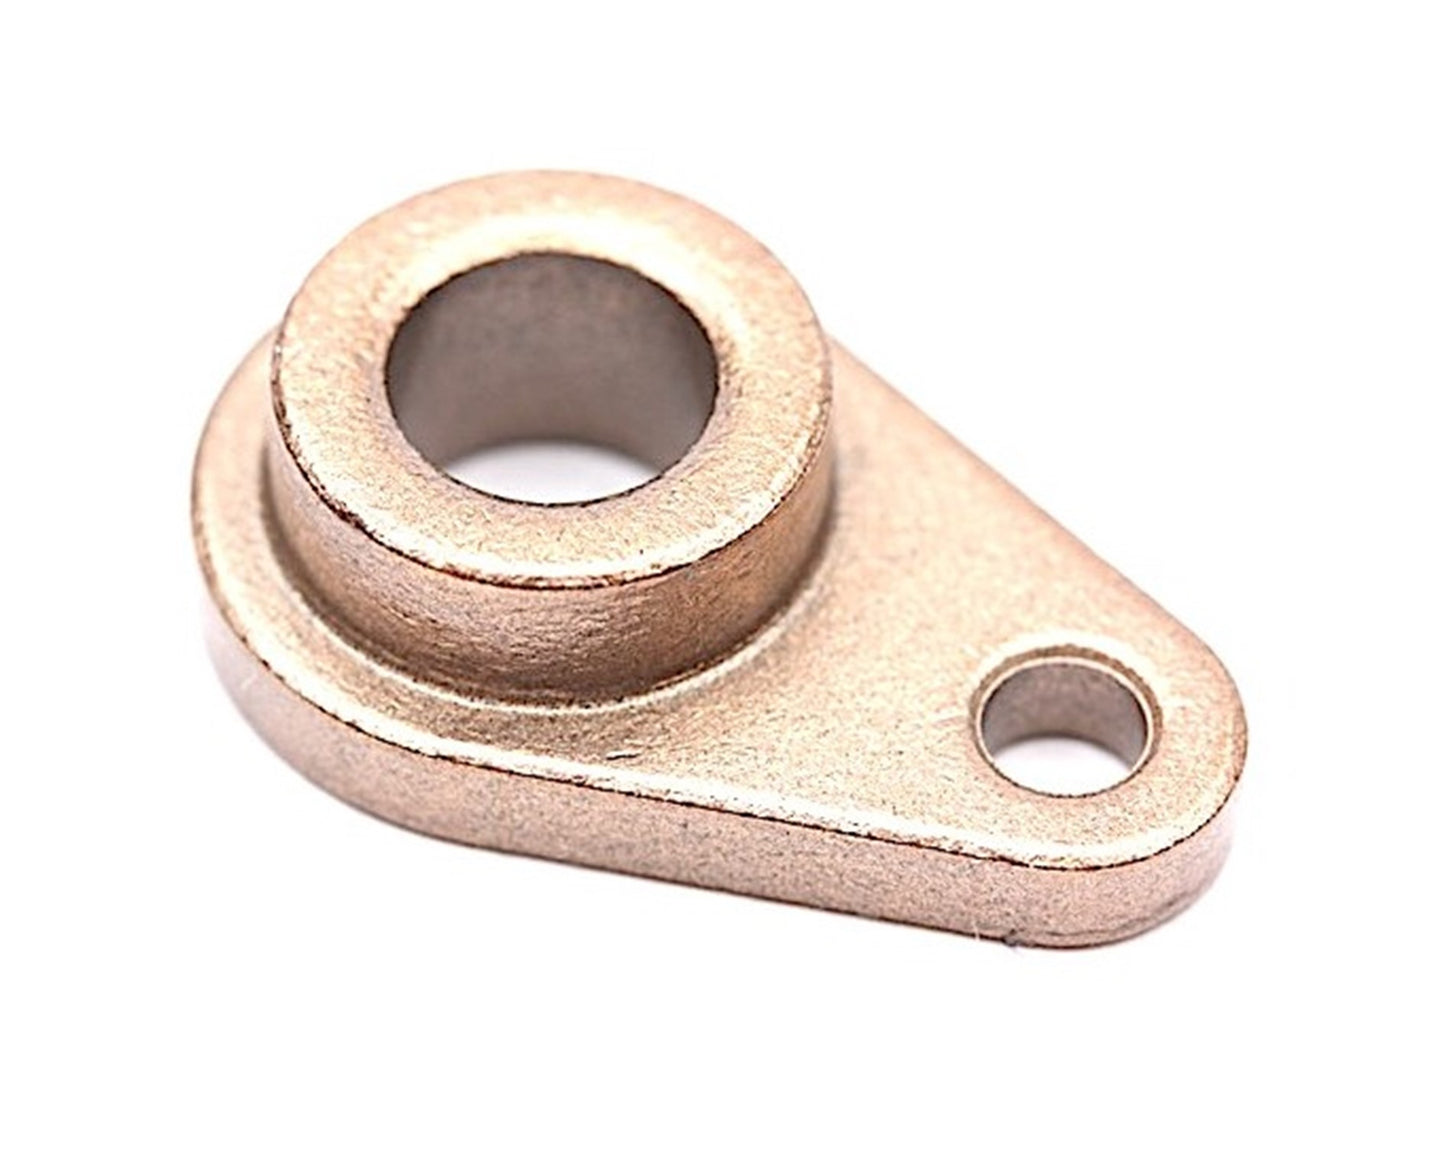 Compatible Tumble Dryer Teardrop Bearing for Hotpoint Creda Indesit C00142628